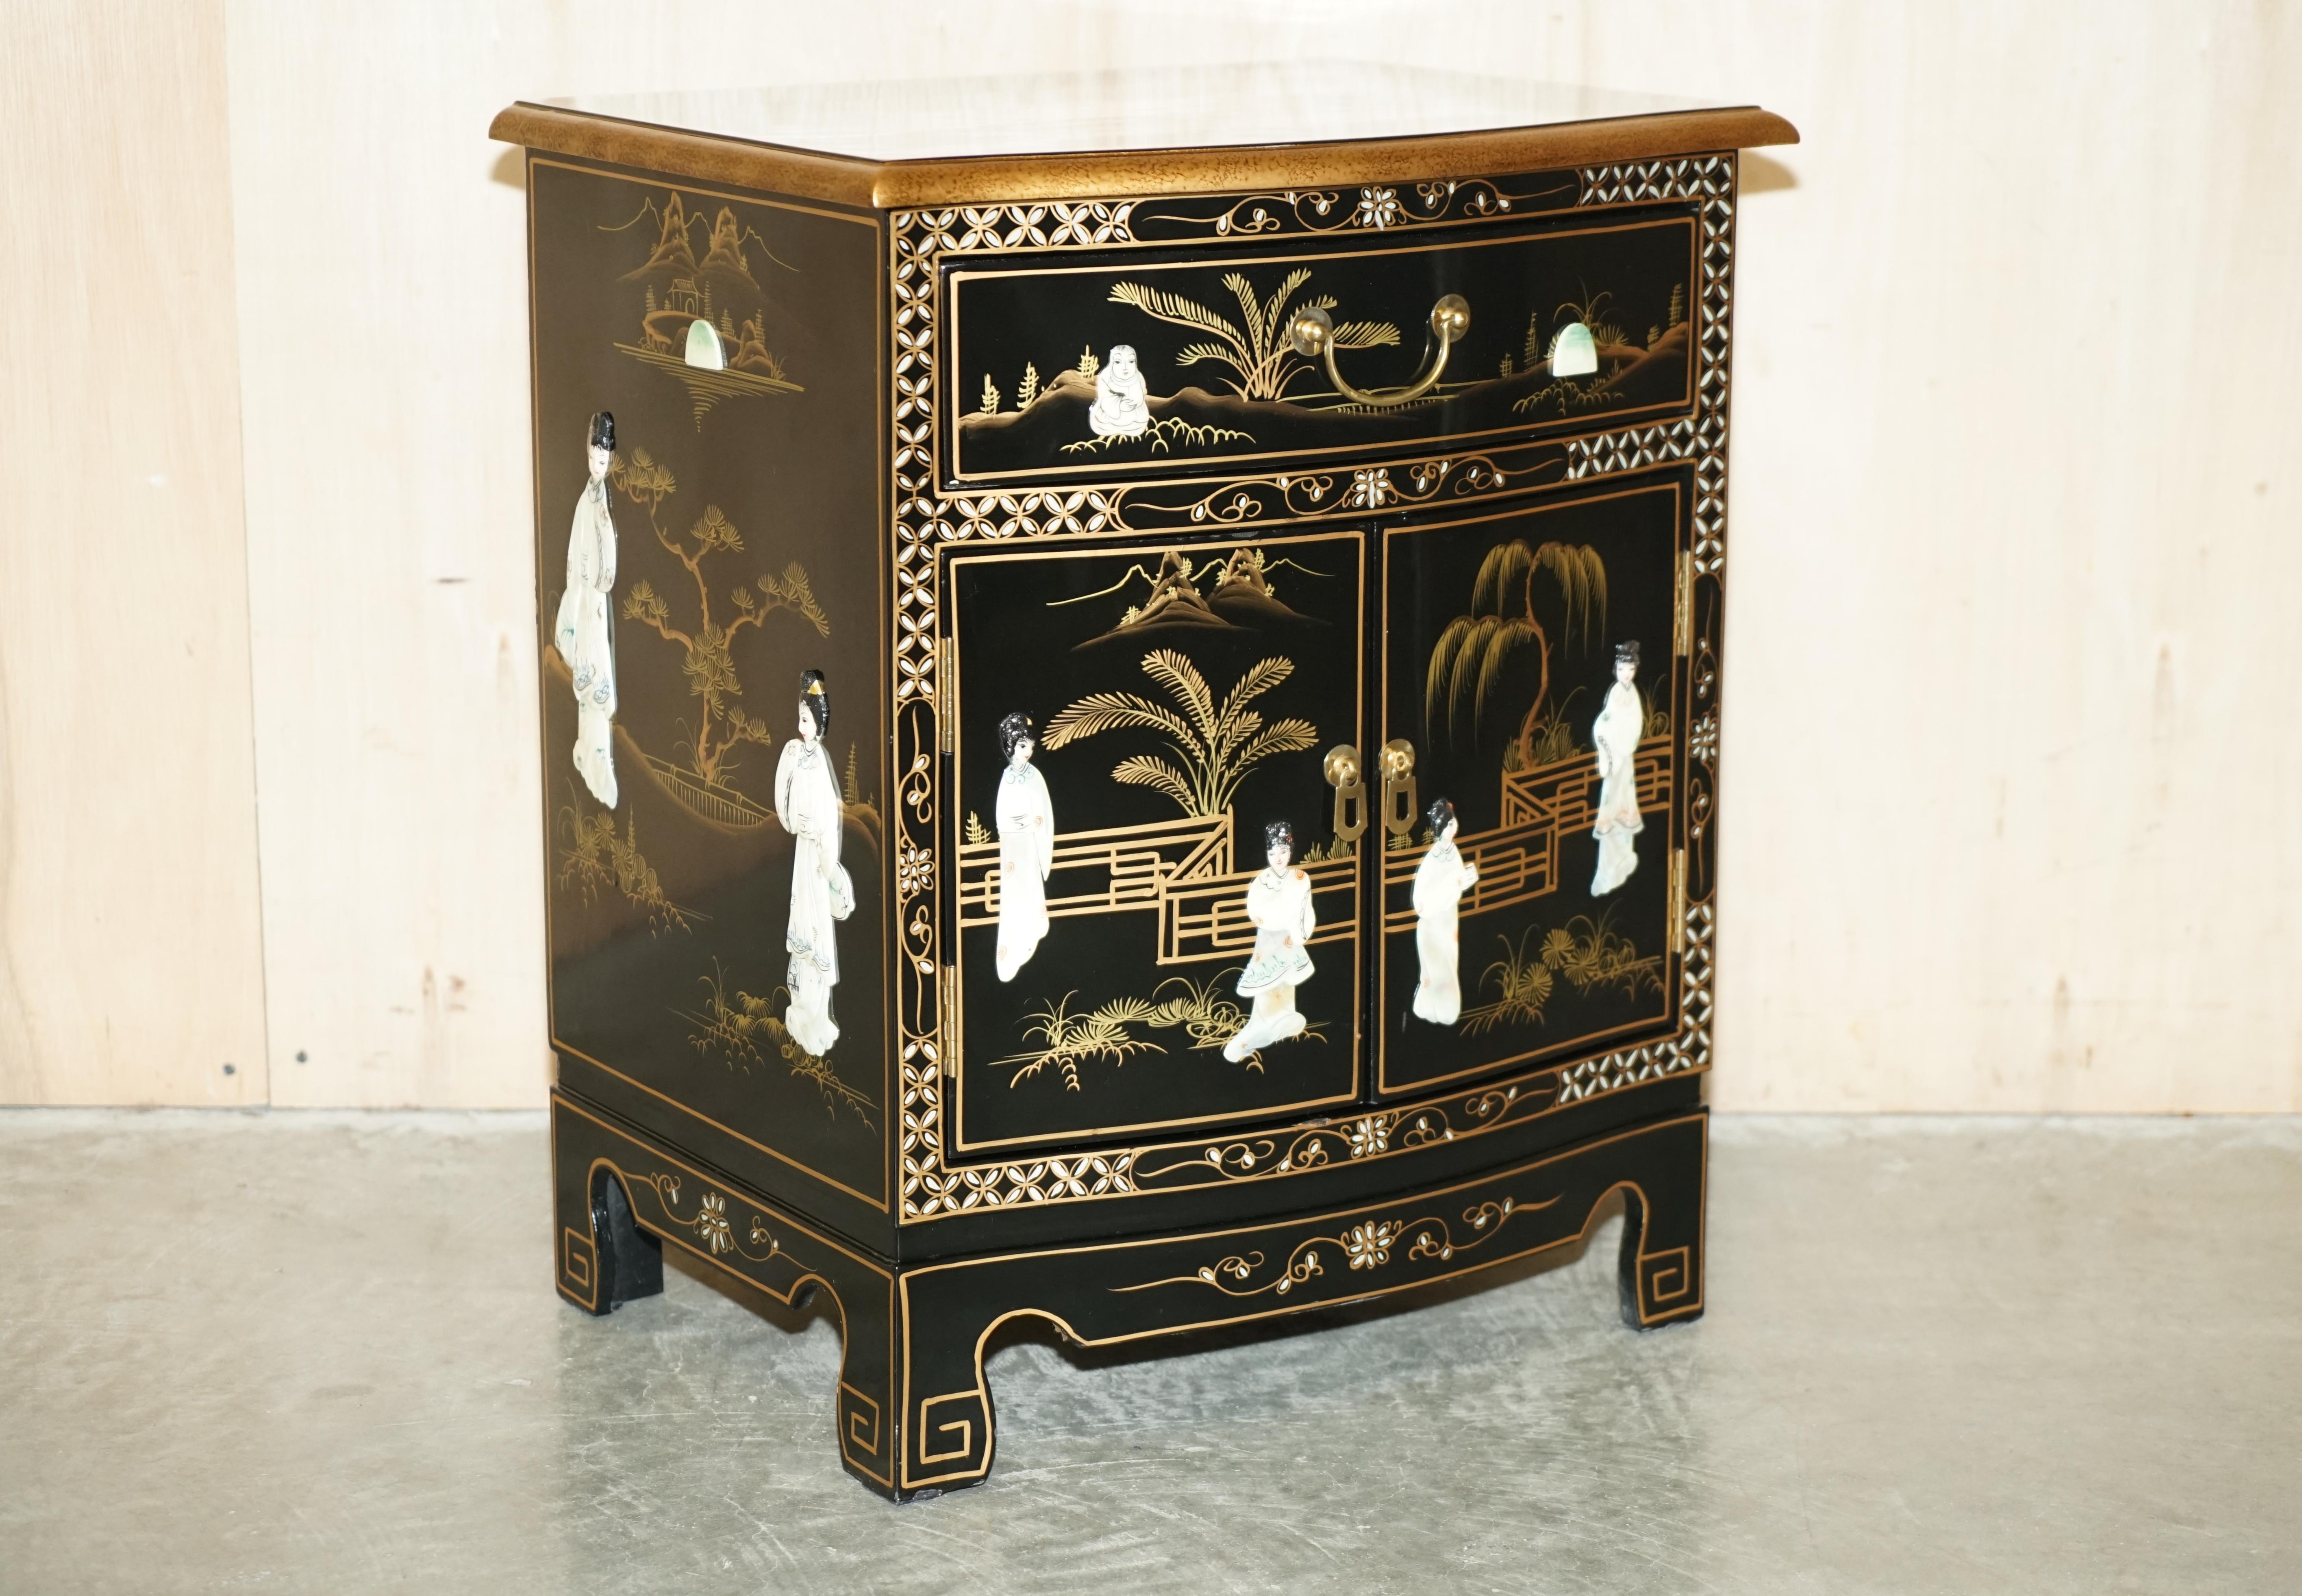 We are delighted to offer for sale this lovely Chinese side cabinet with native scenes of Geisha girls carved out of soapstone and decorated in the Chinoiserie style

A very good looking and well made piece, these are now highly collectable as art